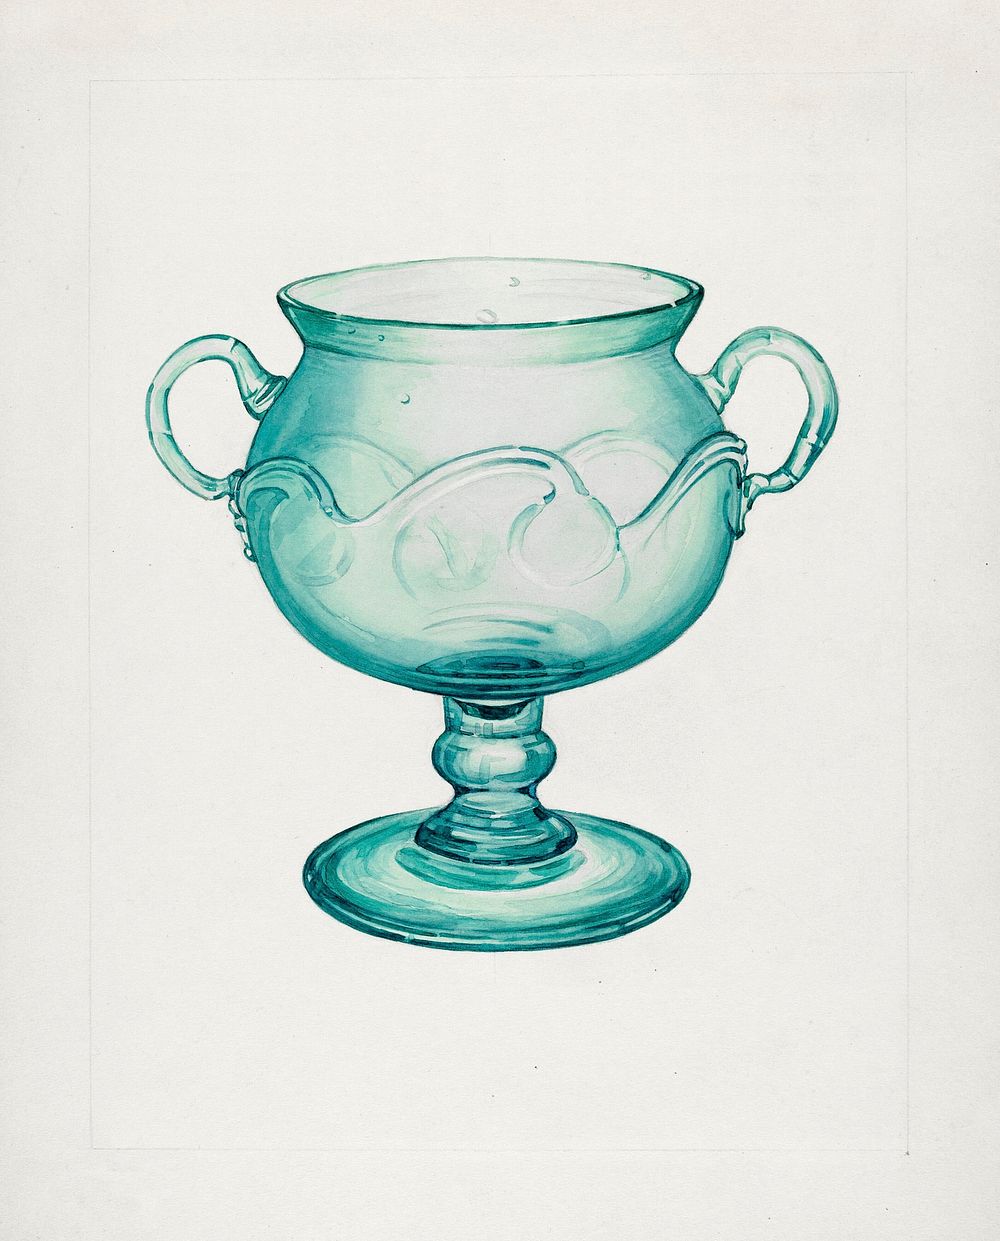 Pitcher (ca. 1937) by Giacinto Capelli. Original from The National Gallery of Art. Digitally enhanced by rawpixel.